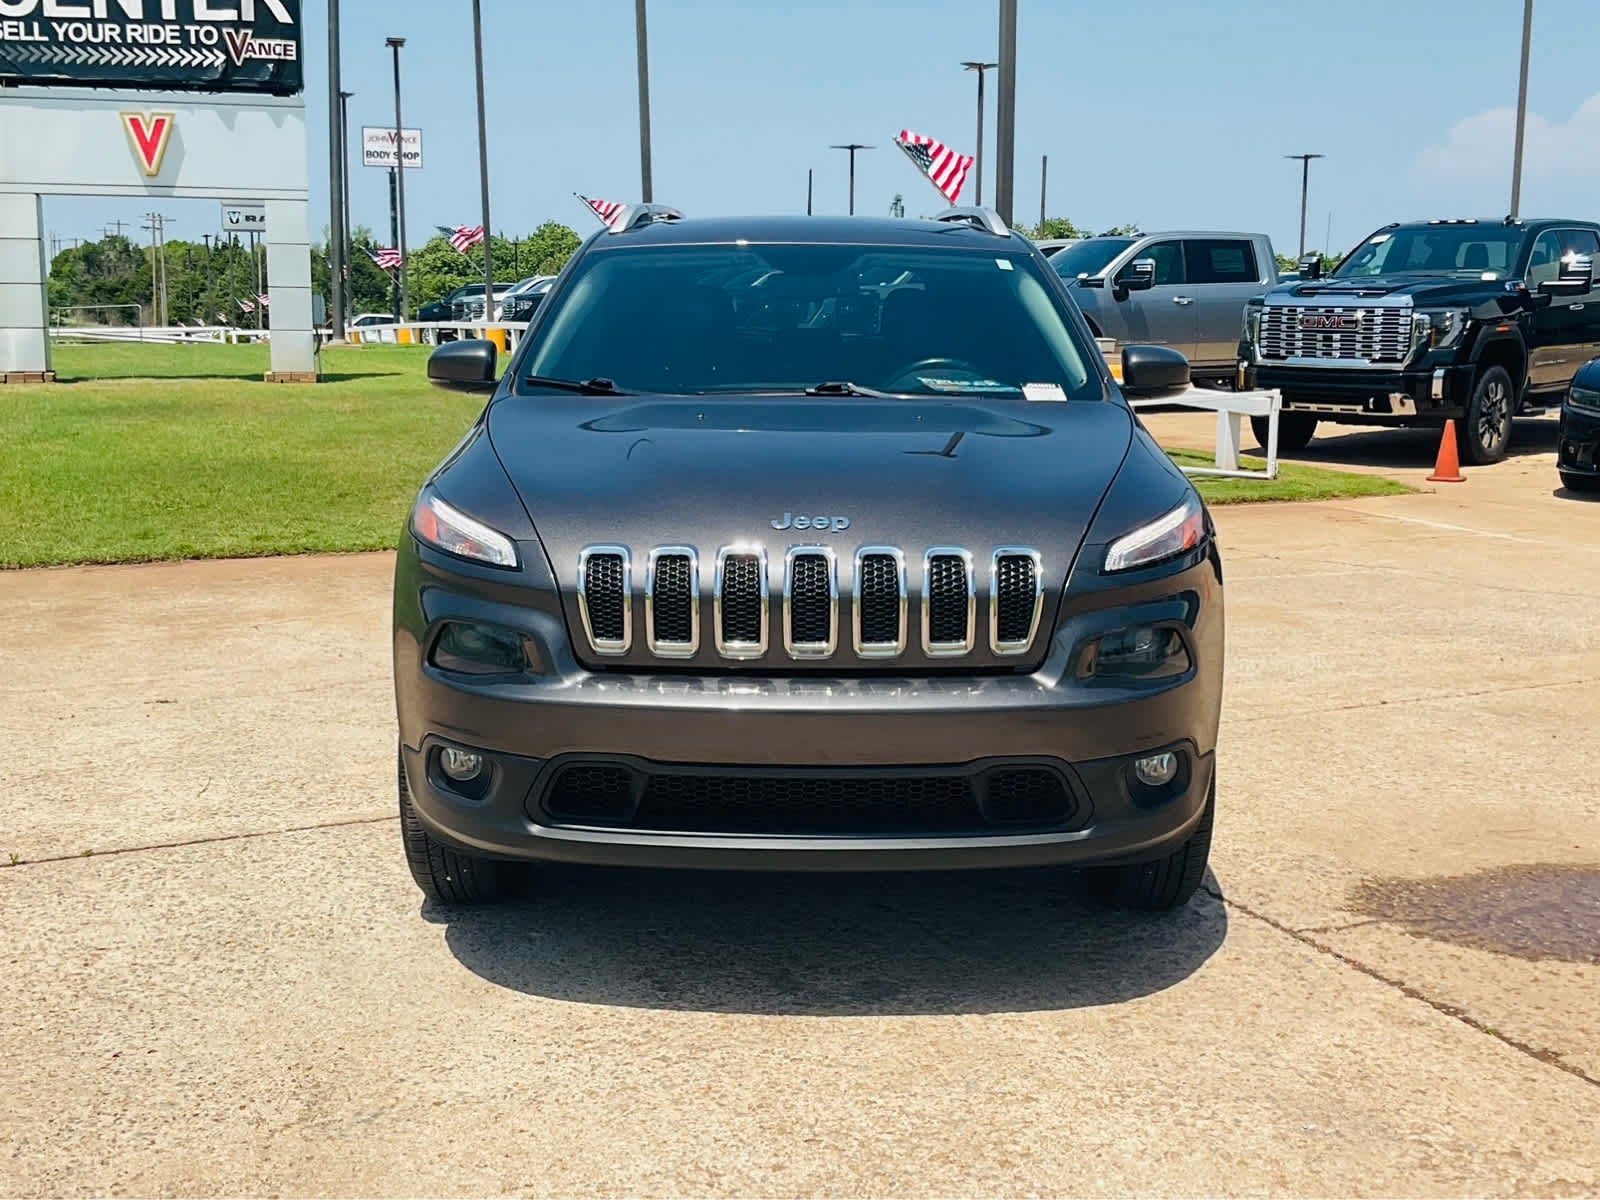 Used 2018 Jeep Cherokee Latitude Plus with VIN 1C4PJMLX7JD548924 for sale in Guthrie, OK